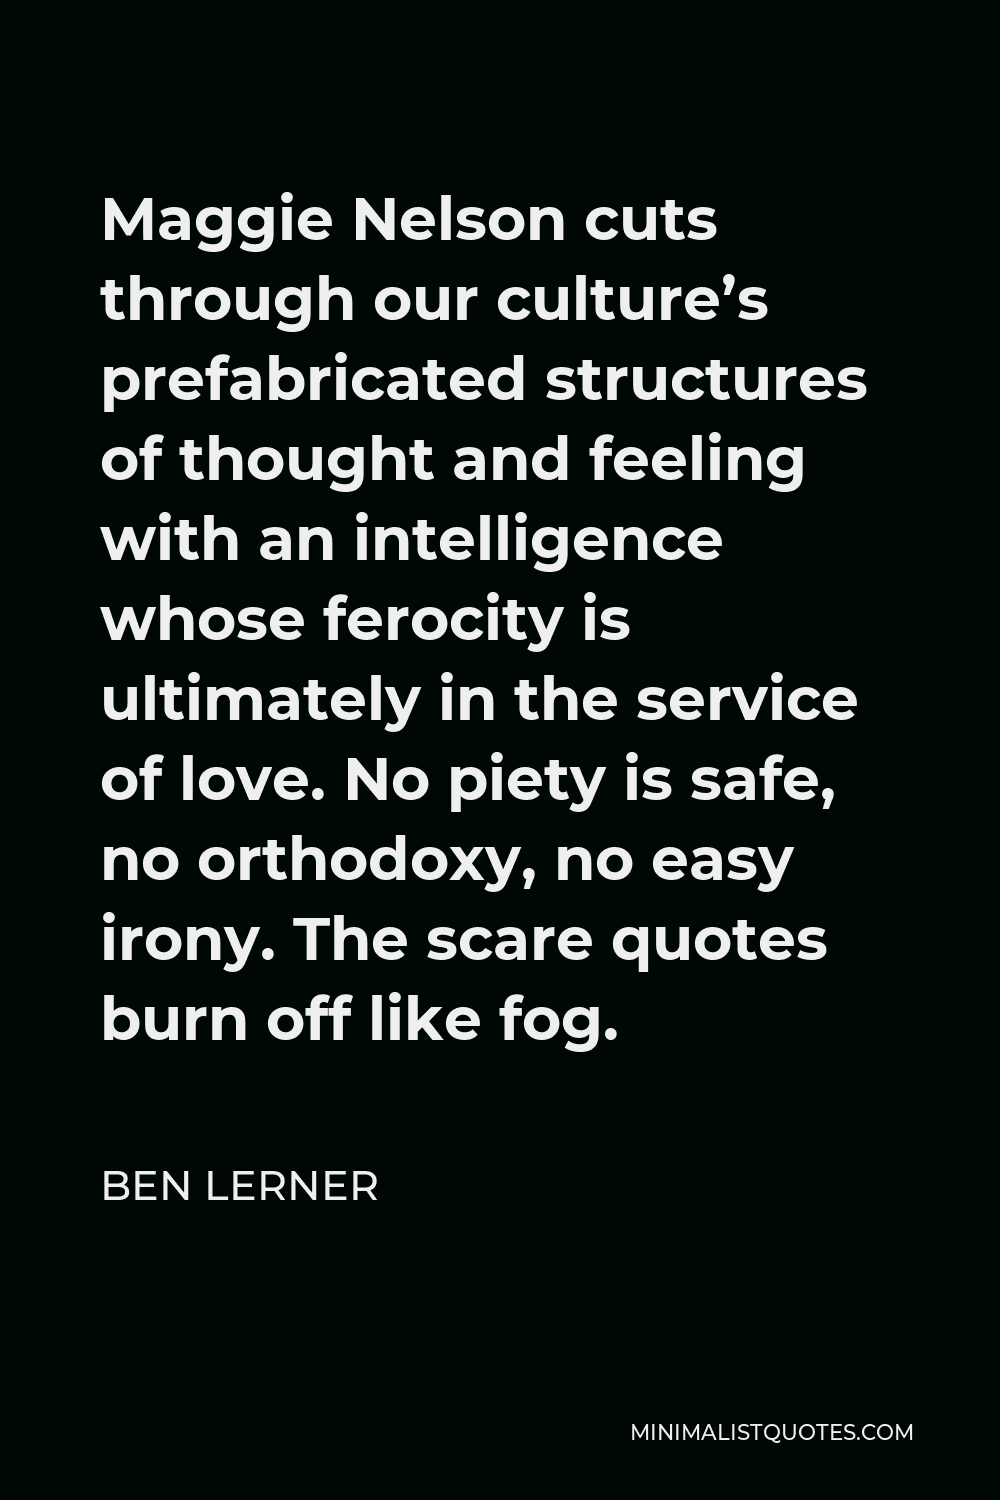 Ben Lerner Quote - Maggie Nelson cuts through our culture’s prefabricated structures of thought and feeling with an intelligence whose ferocity is ultimately in the service of love. No piety is safe, no orthodoxy, no easy irony. The scare quotes burn off like fog.